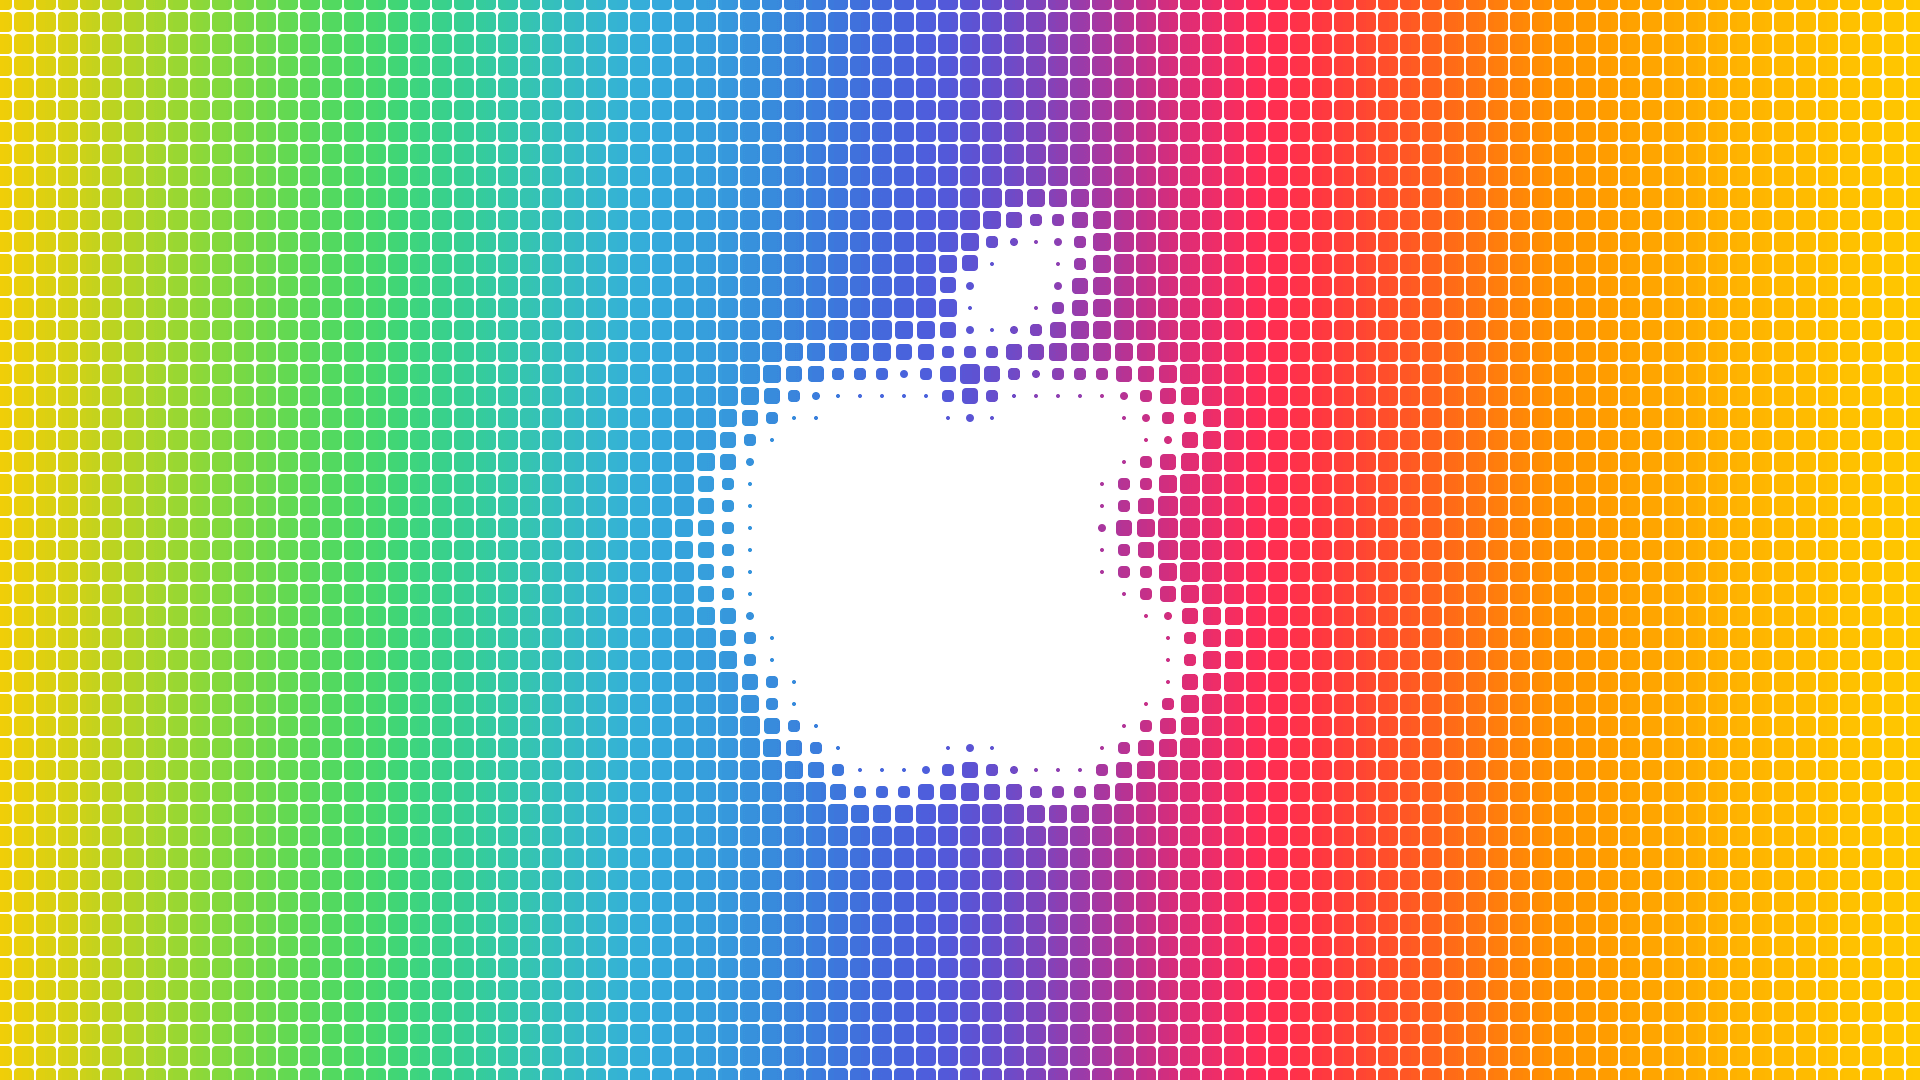 Get Hype for WWDC 2014 With These Colorful Wallpaper